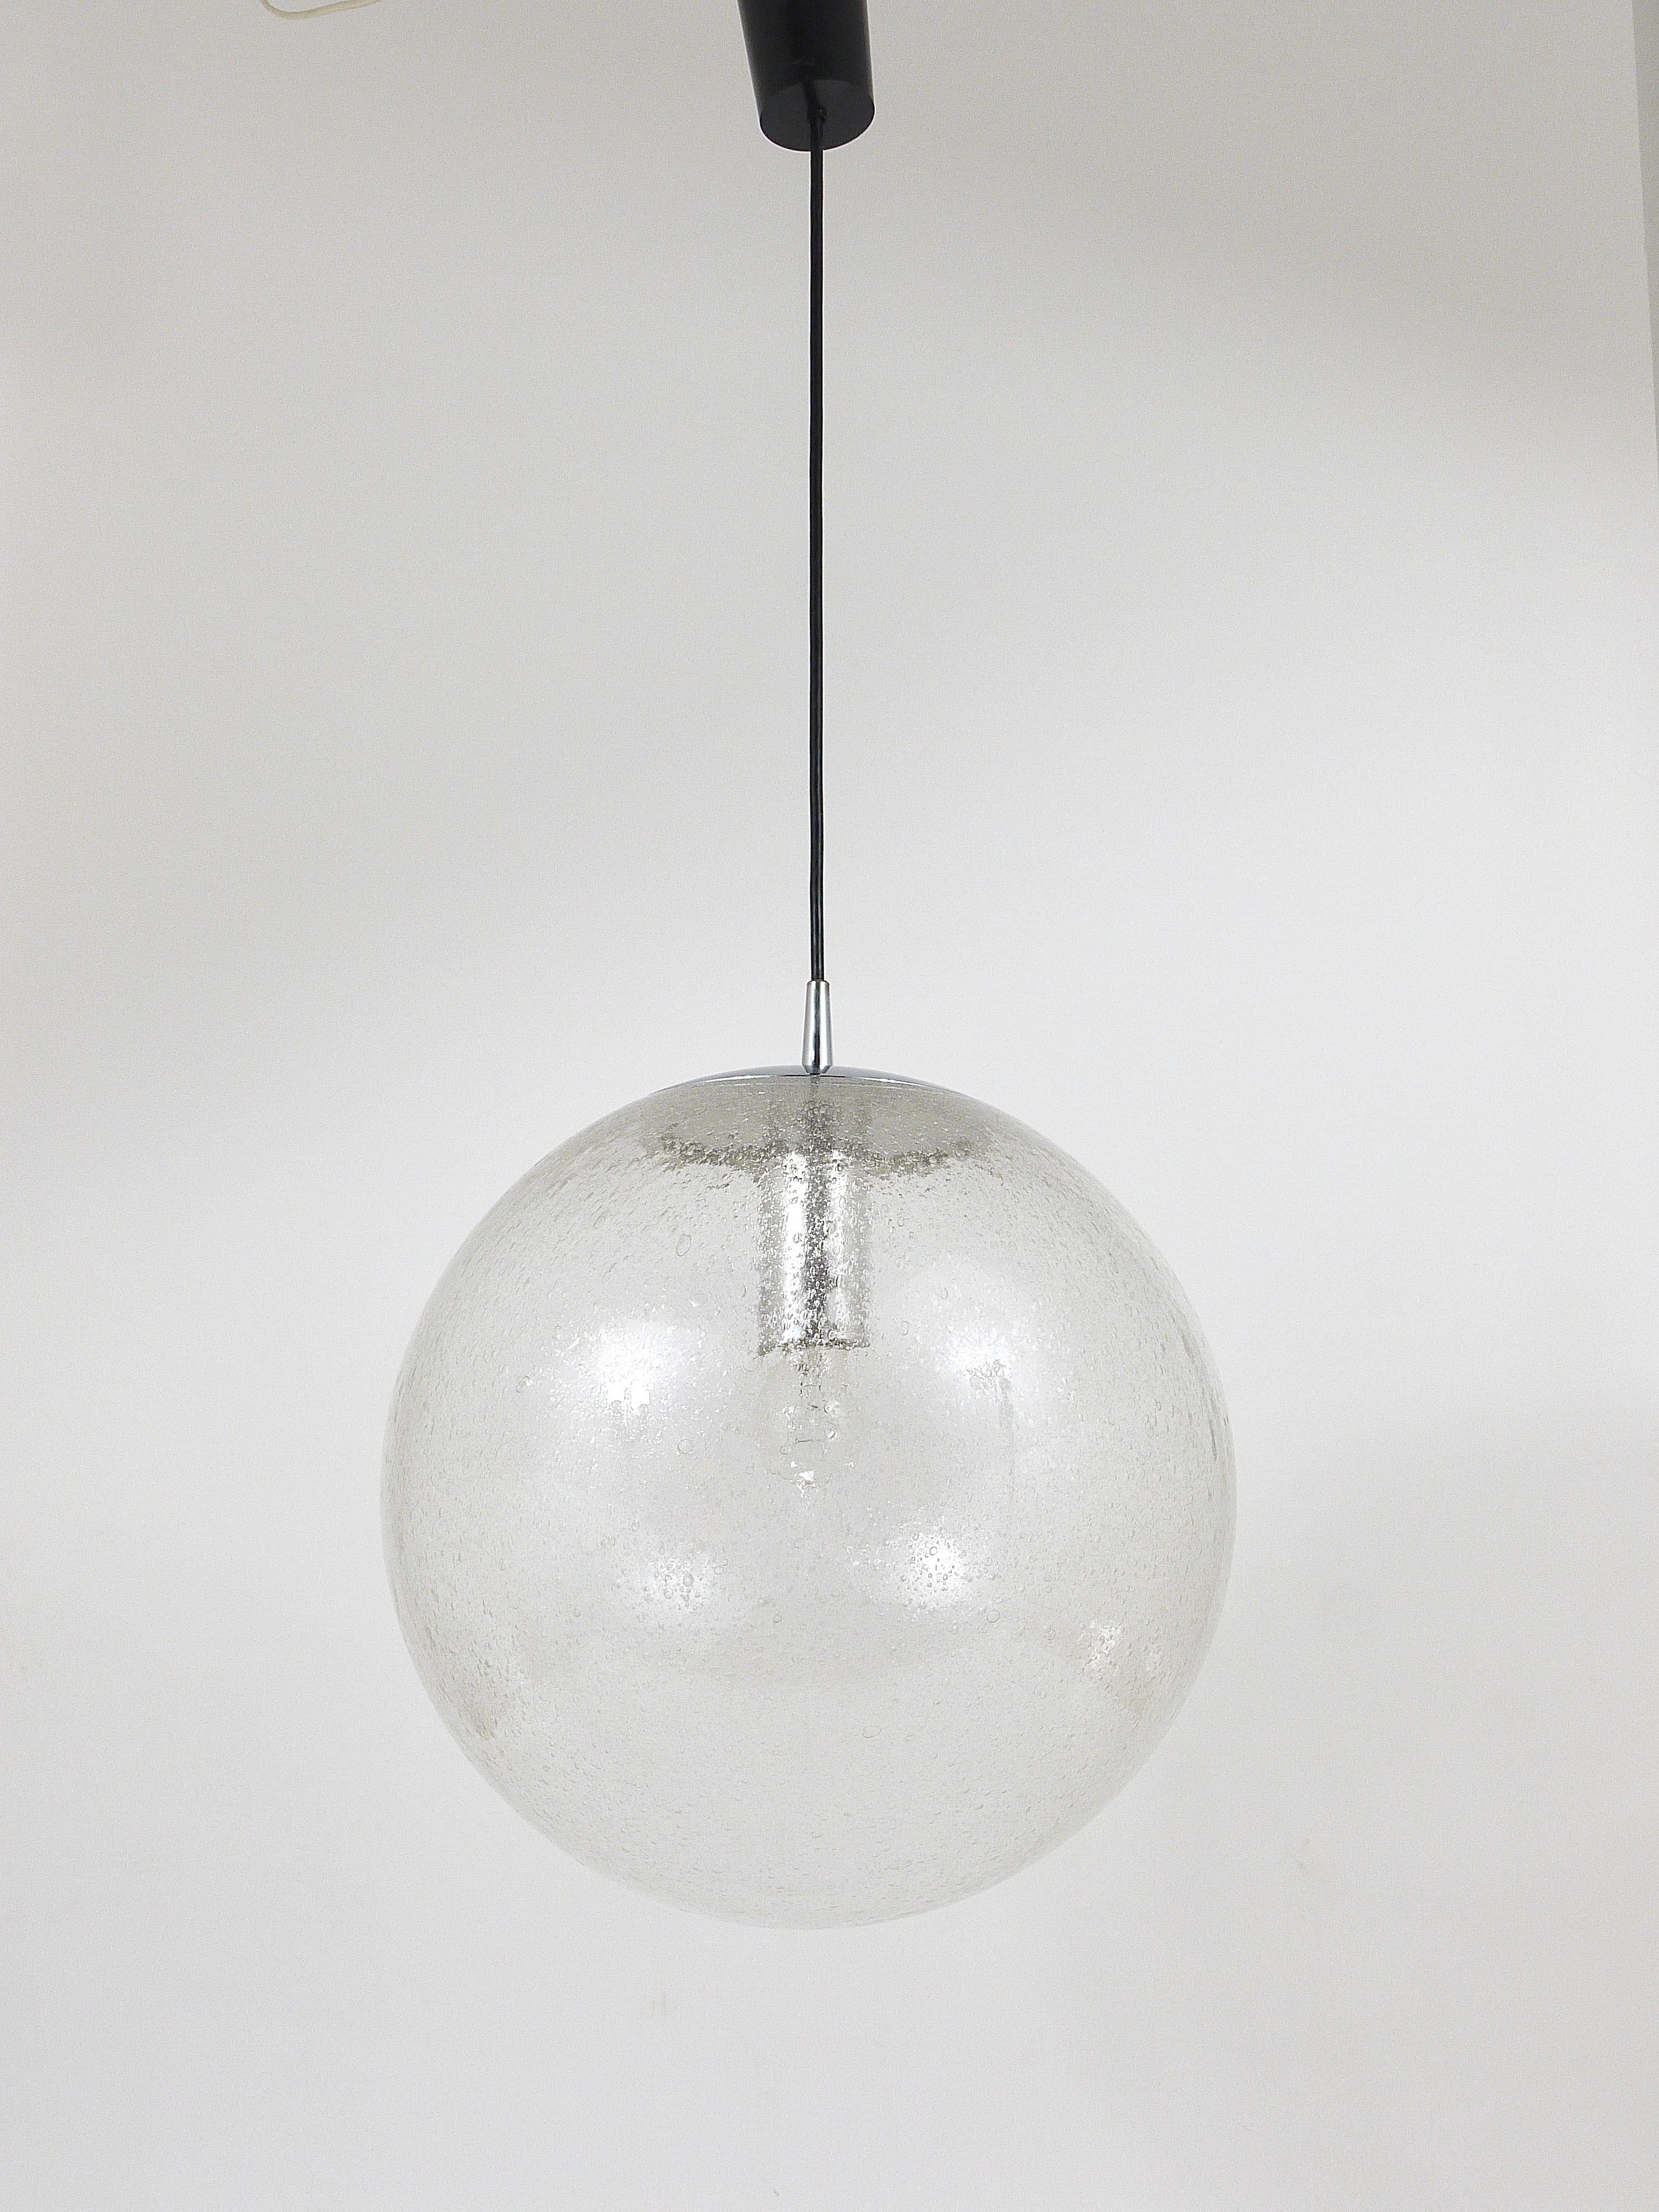 Large Peil & Putzler Bubble Glass and Chrome Globe Pendant Lamp, Germany, 1970s For Sale 7